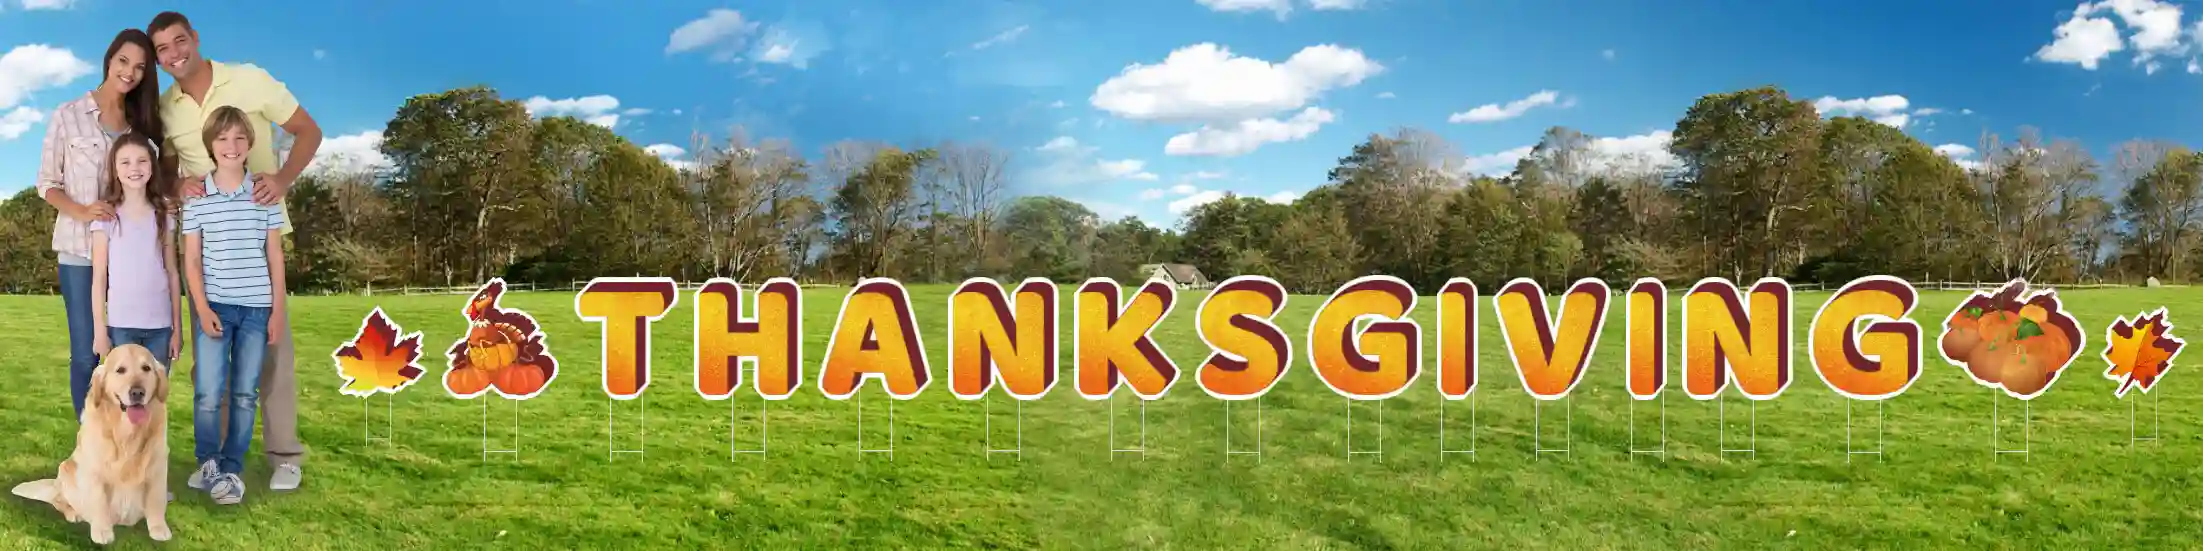 thanksgiving lawn letters